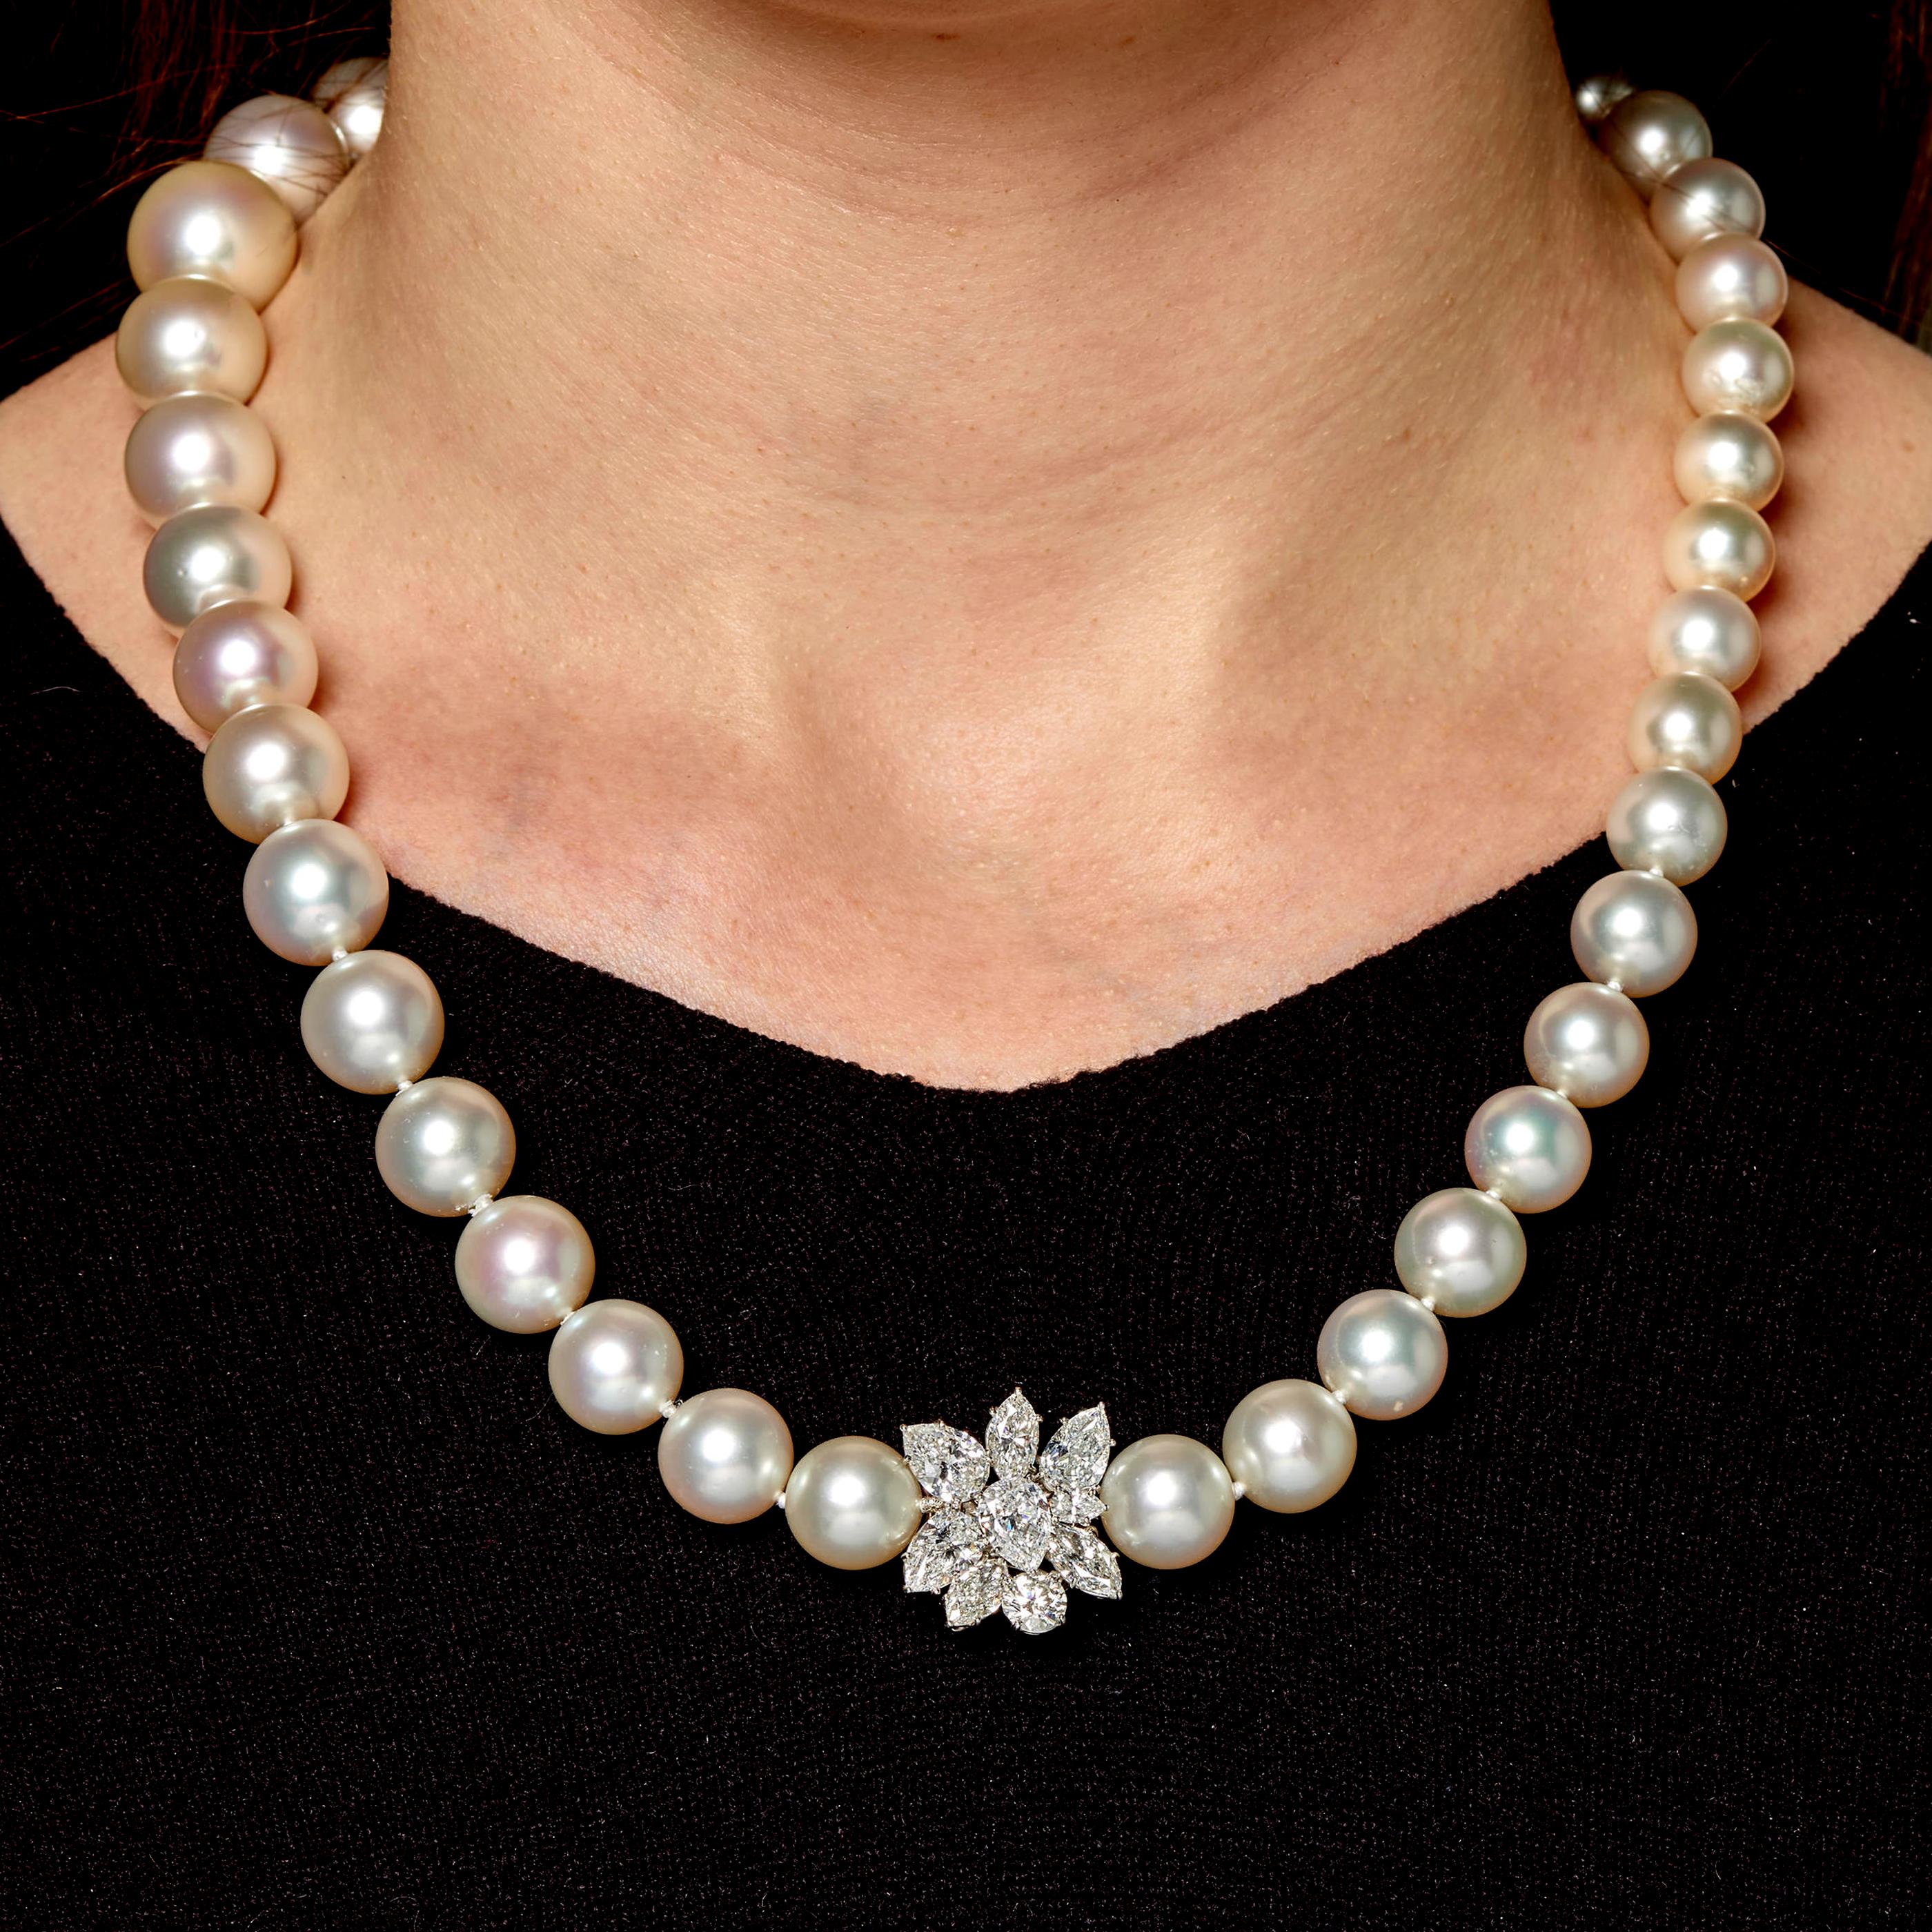 This exquisite piece of jewelry is strung with graduated cultured pearls that range in size from 11.1 mm to 17.2 mm, presenting a seamless blend of grandeur and sophistication. These pearls have been carefully selected for their lustrous beauty,